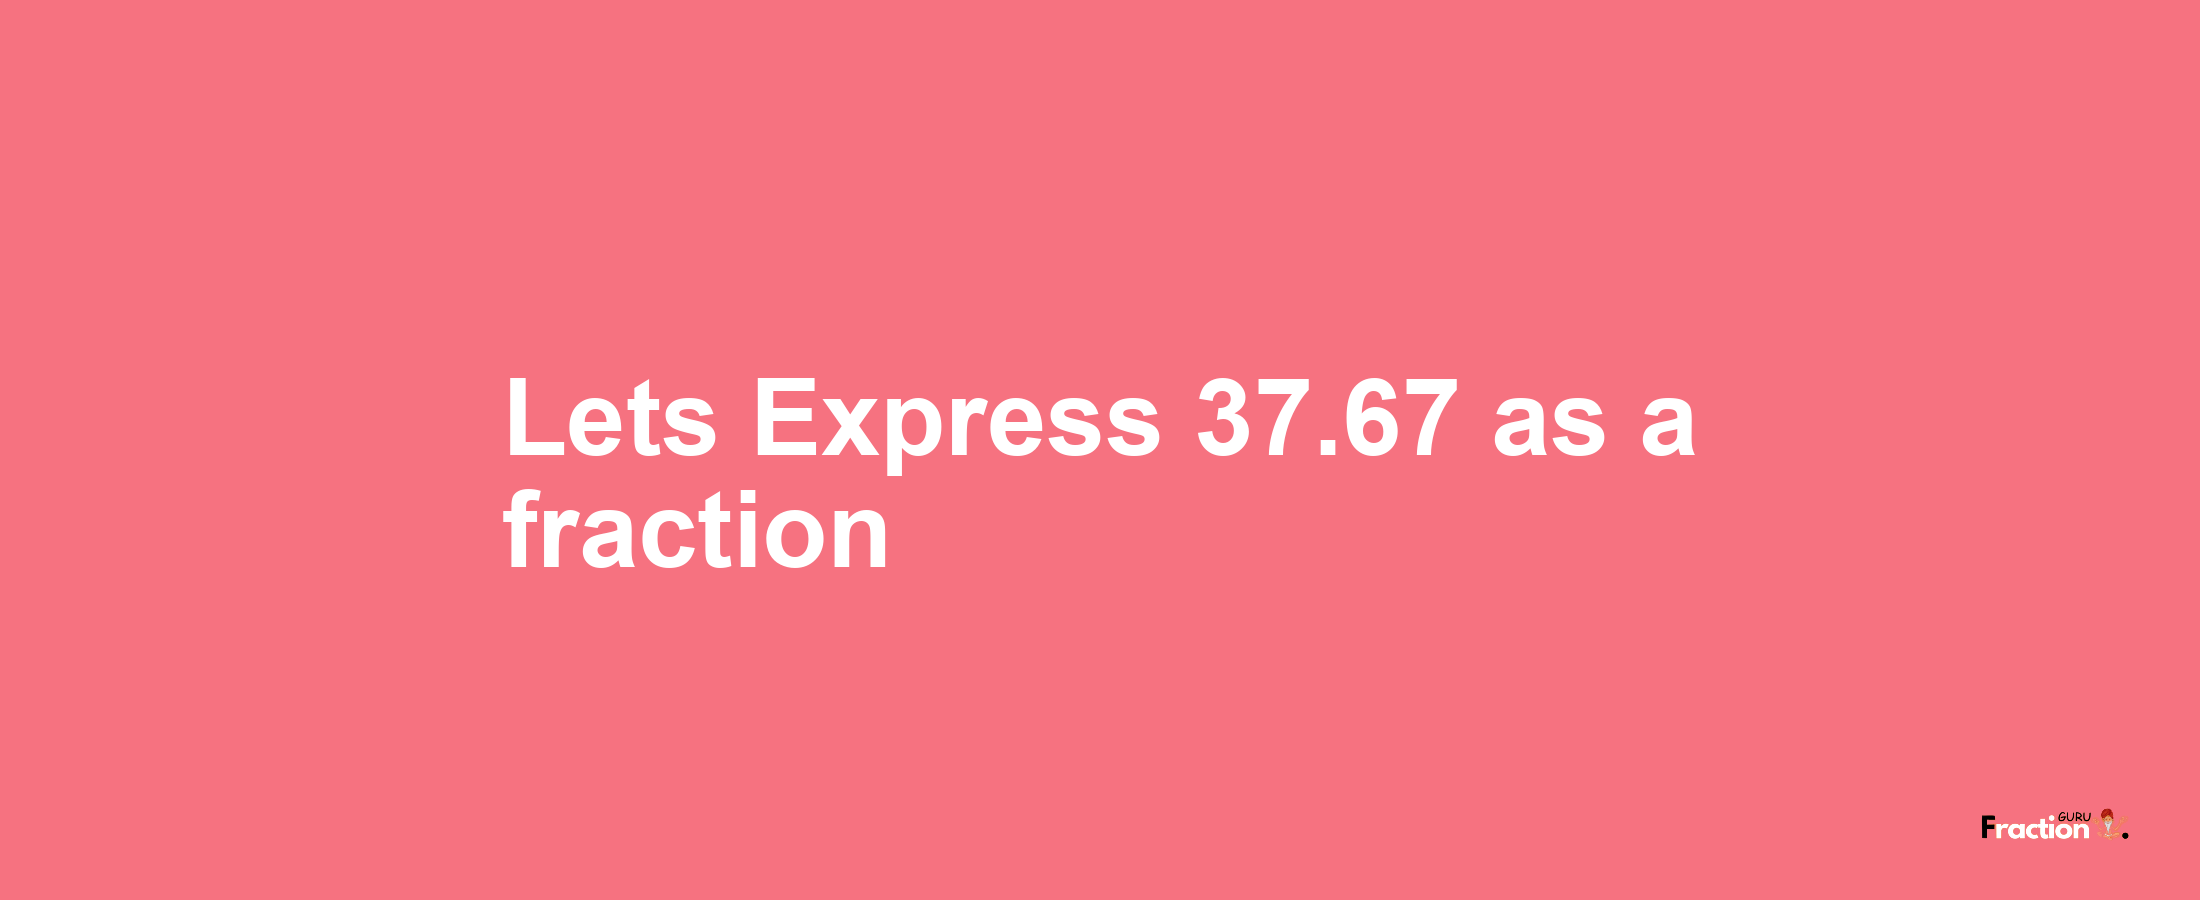 Lets Express 37.67 as afraction